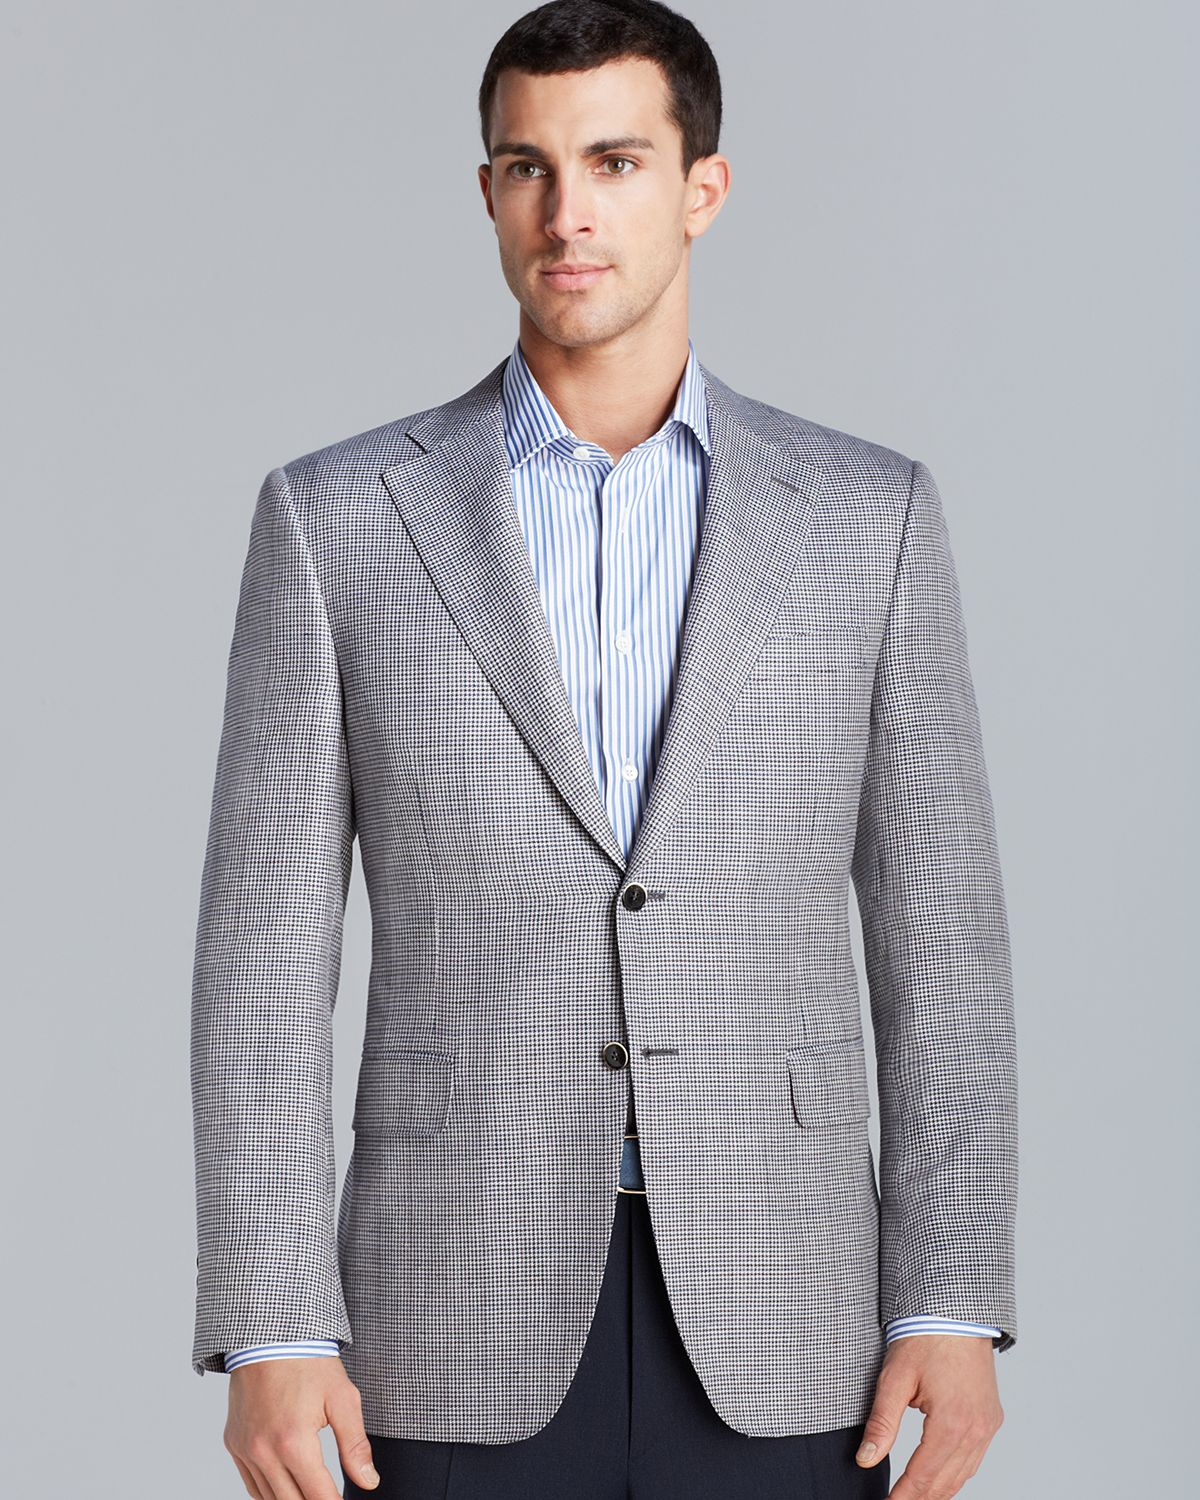 Canali Siena Twotone Houndstooth Sport Coat Regular Fit in Light Grey ...